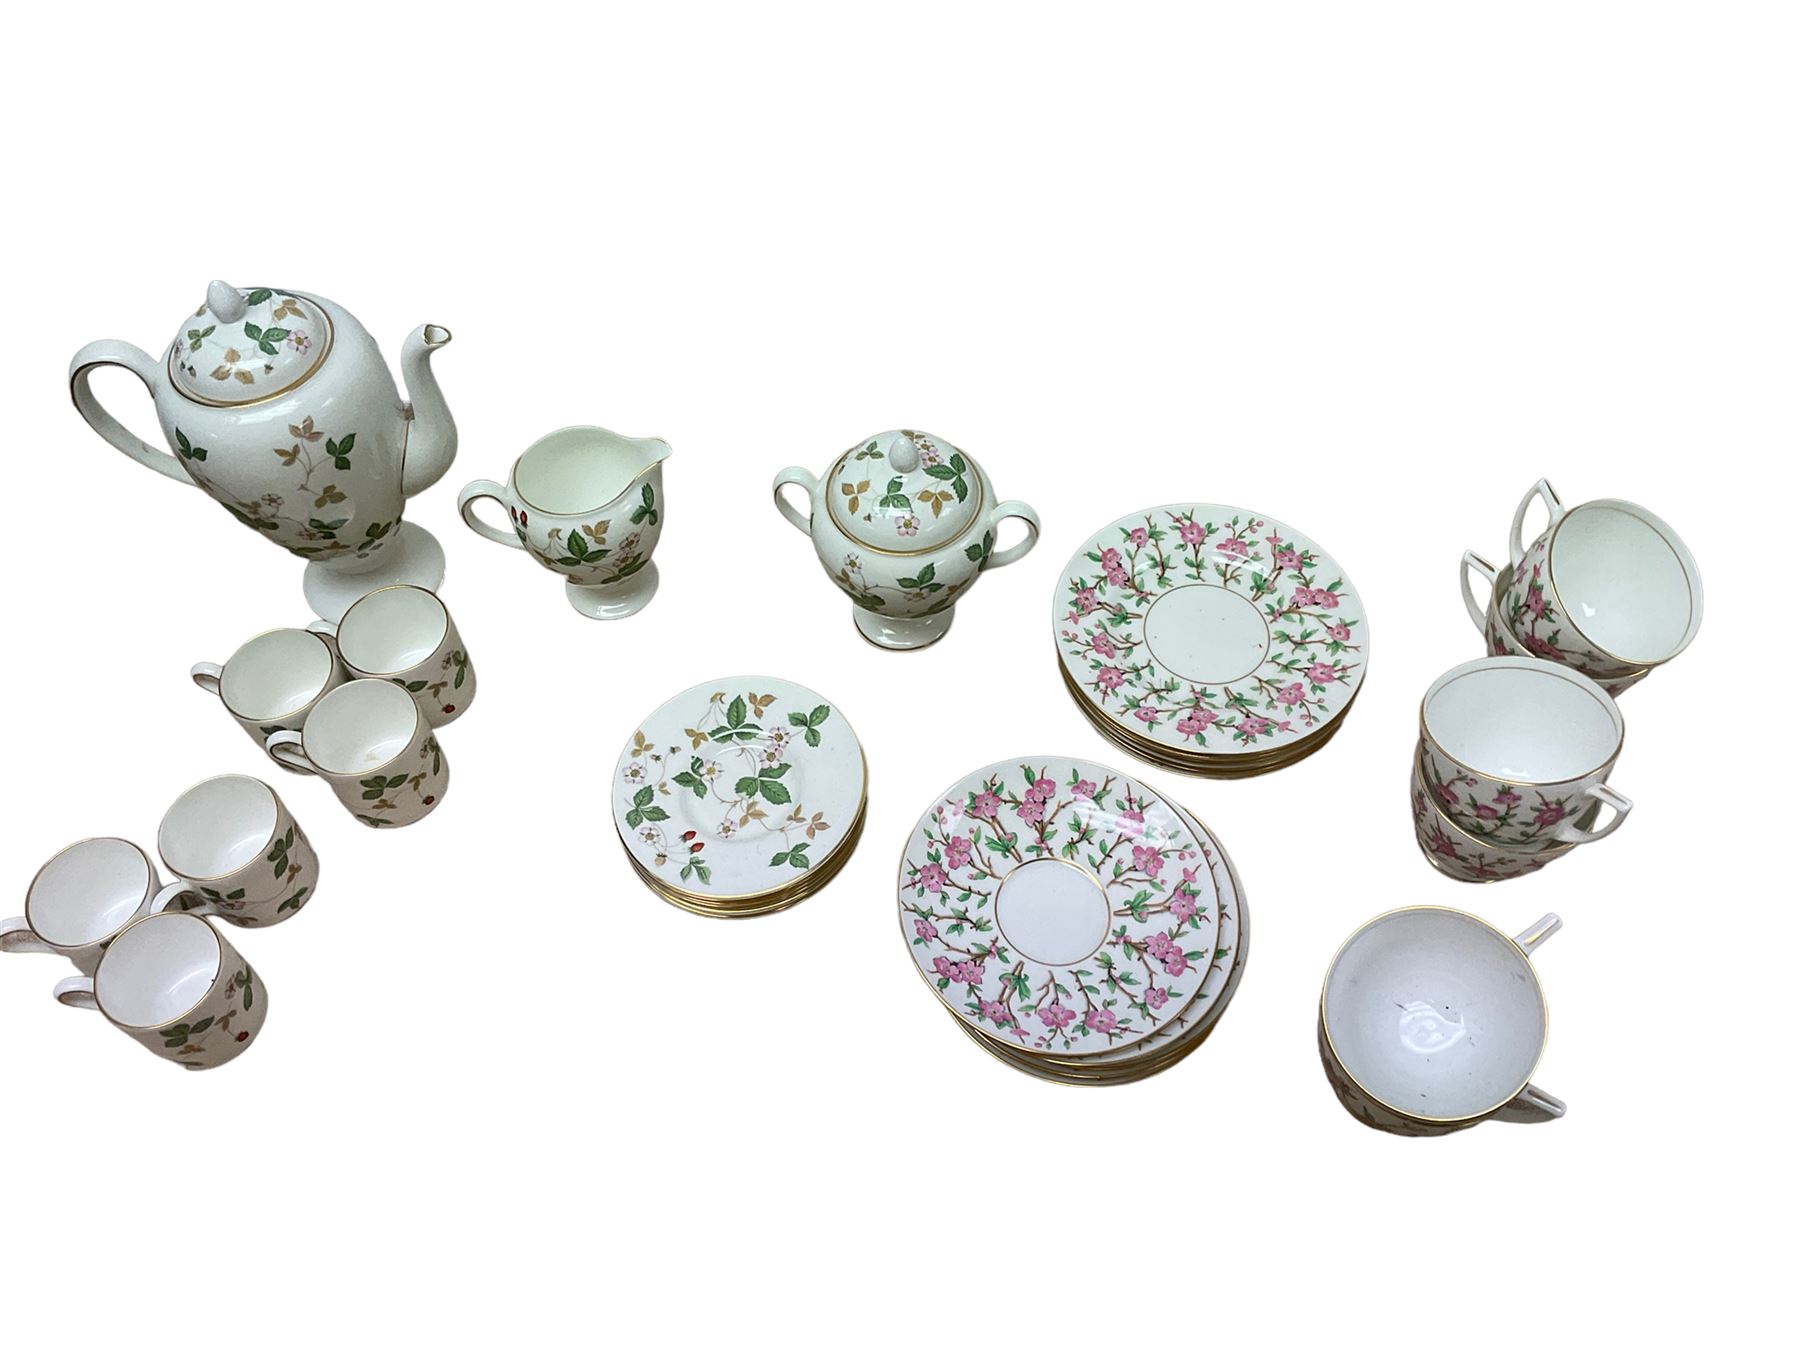 Minton tea service for six decorated with cherry blossom - Image 2 of 3